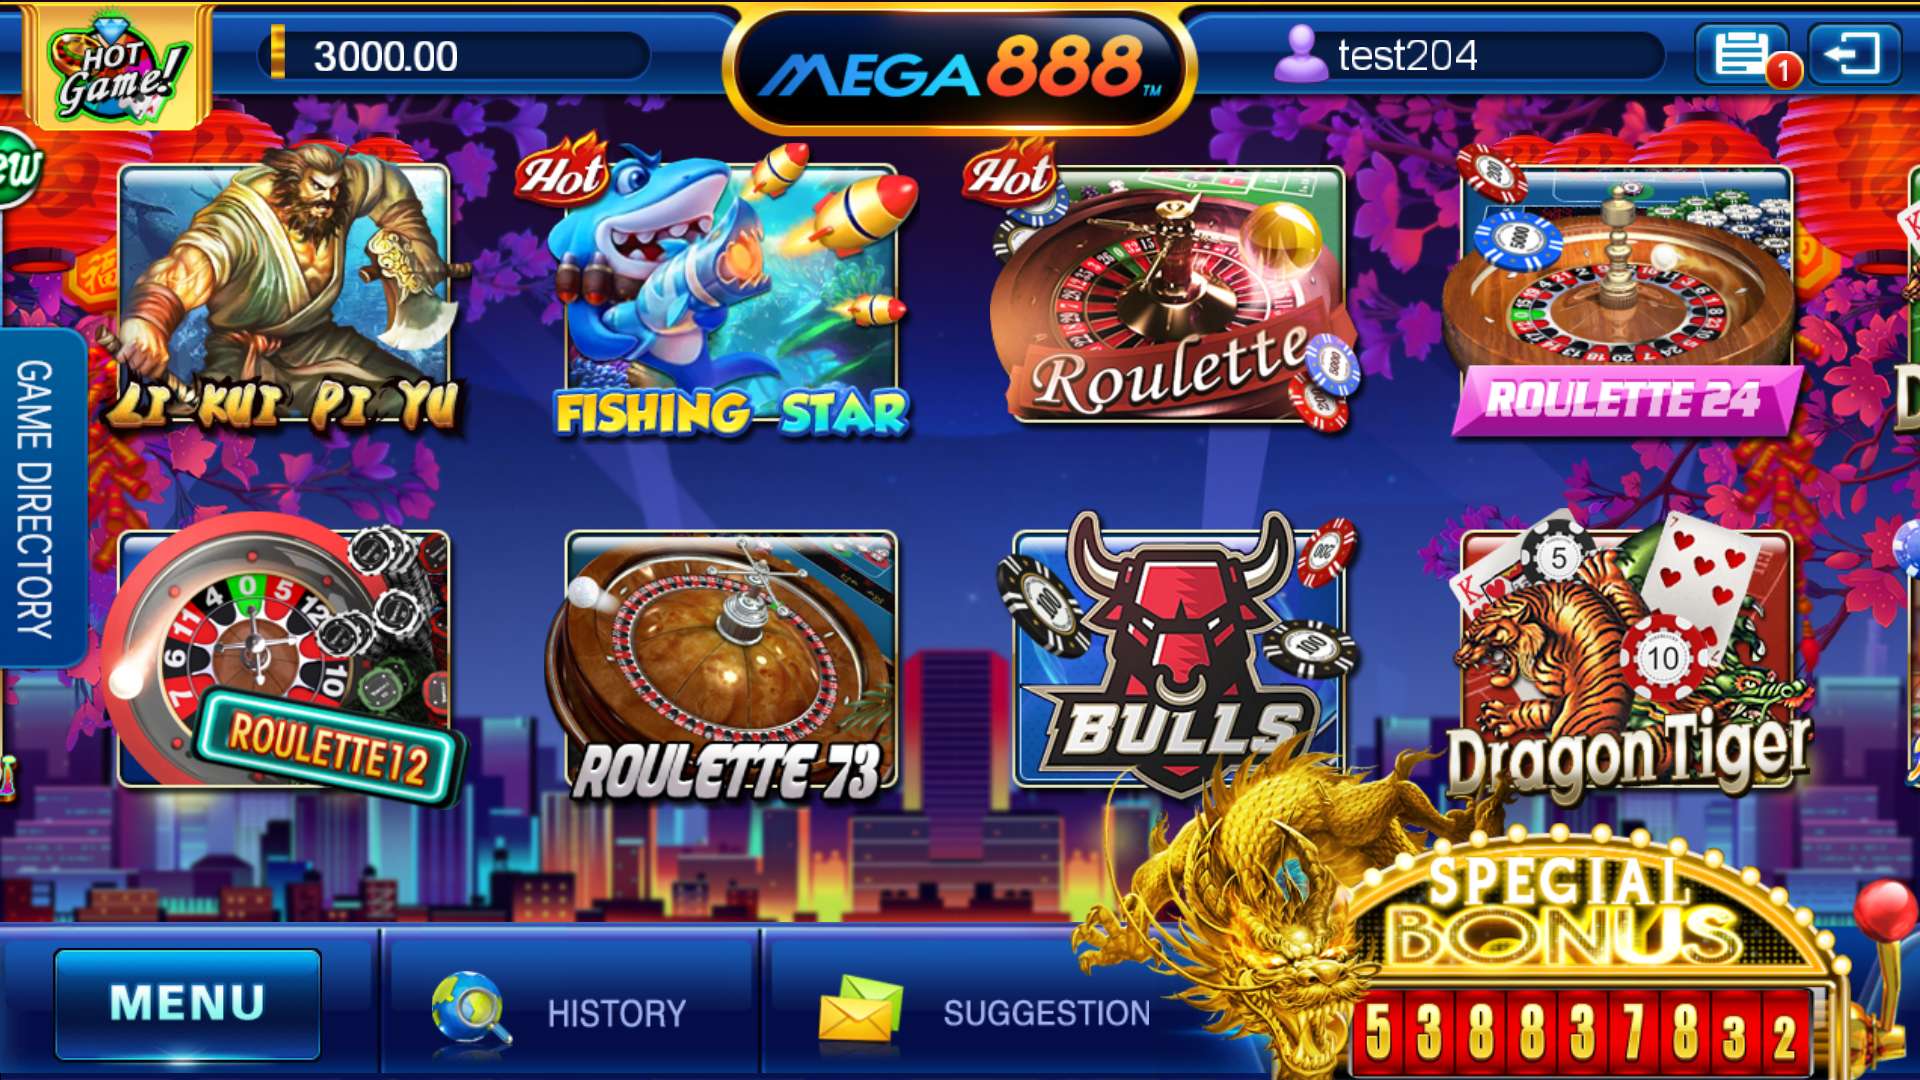 Mega888 – Why Should You Play Online Casinos with Live Casino and Slot Games?